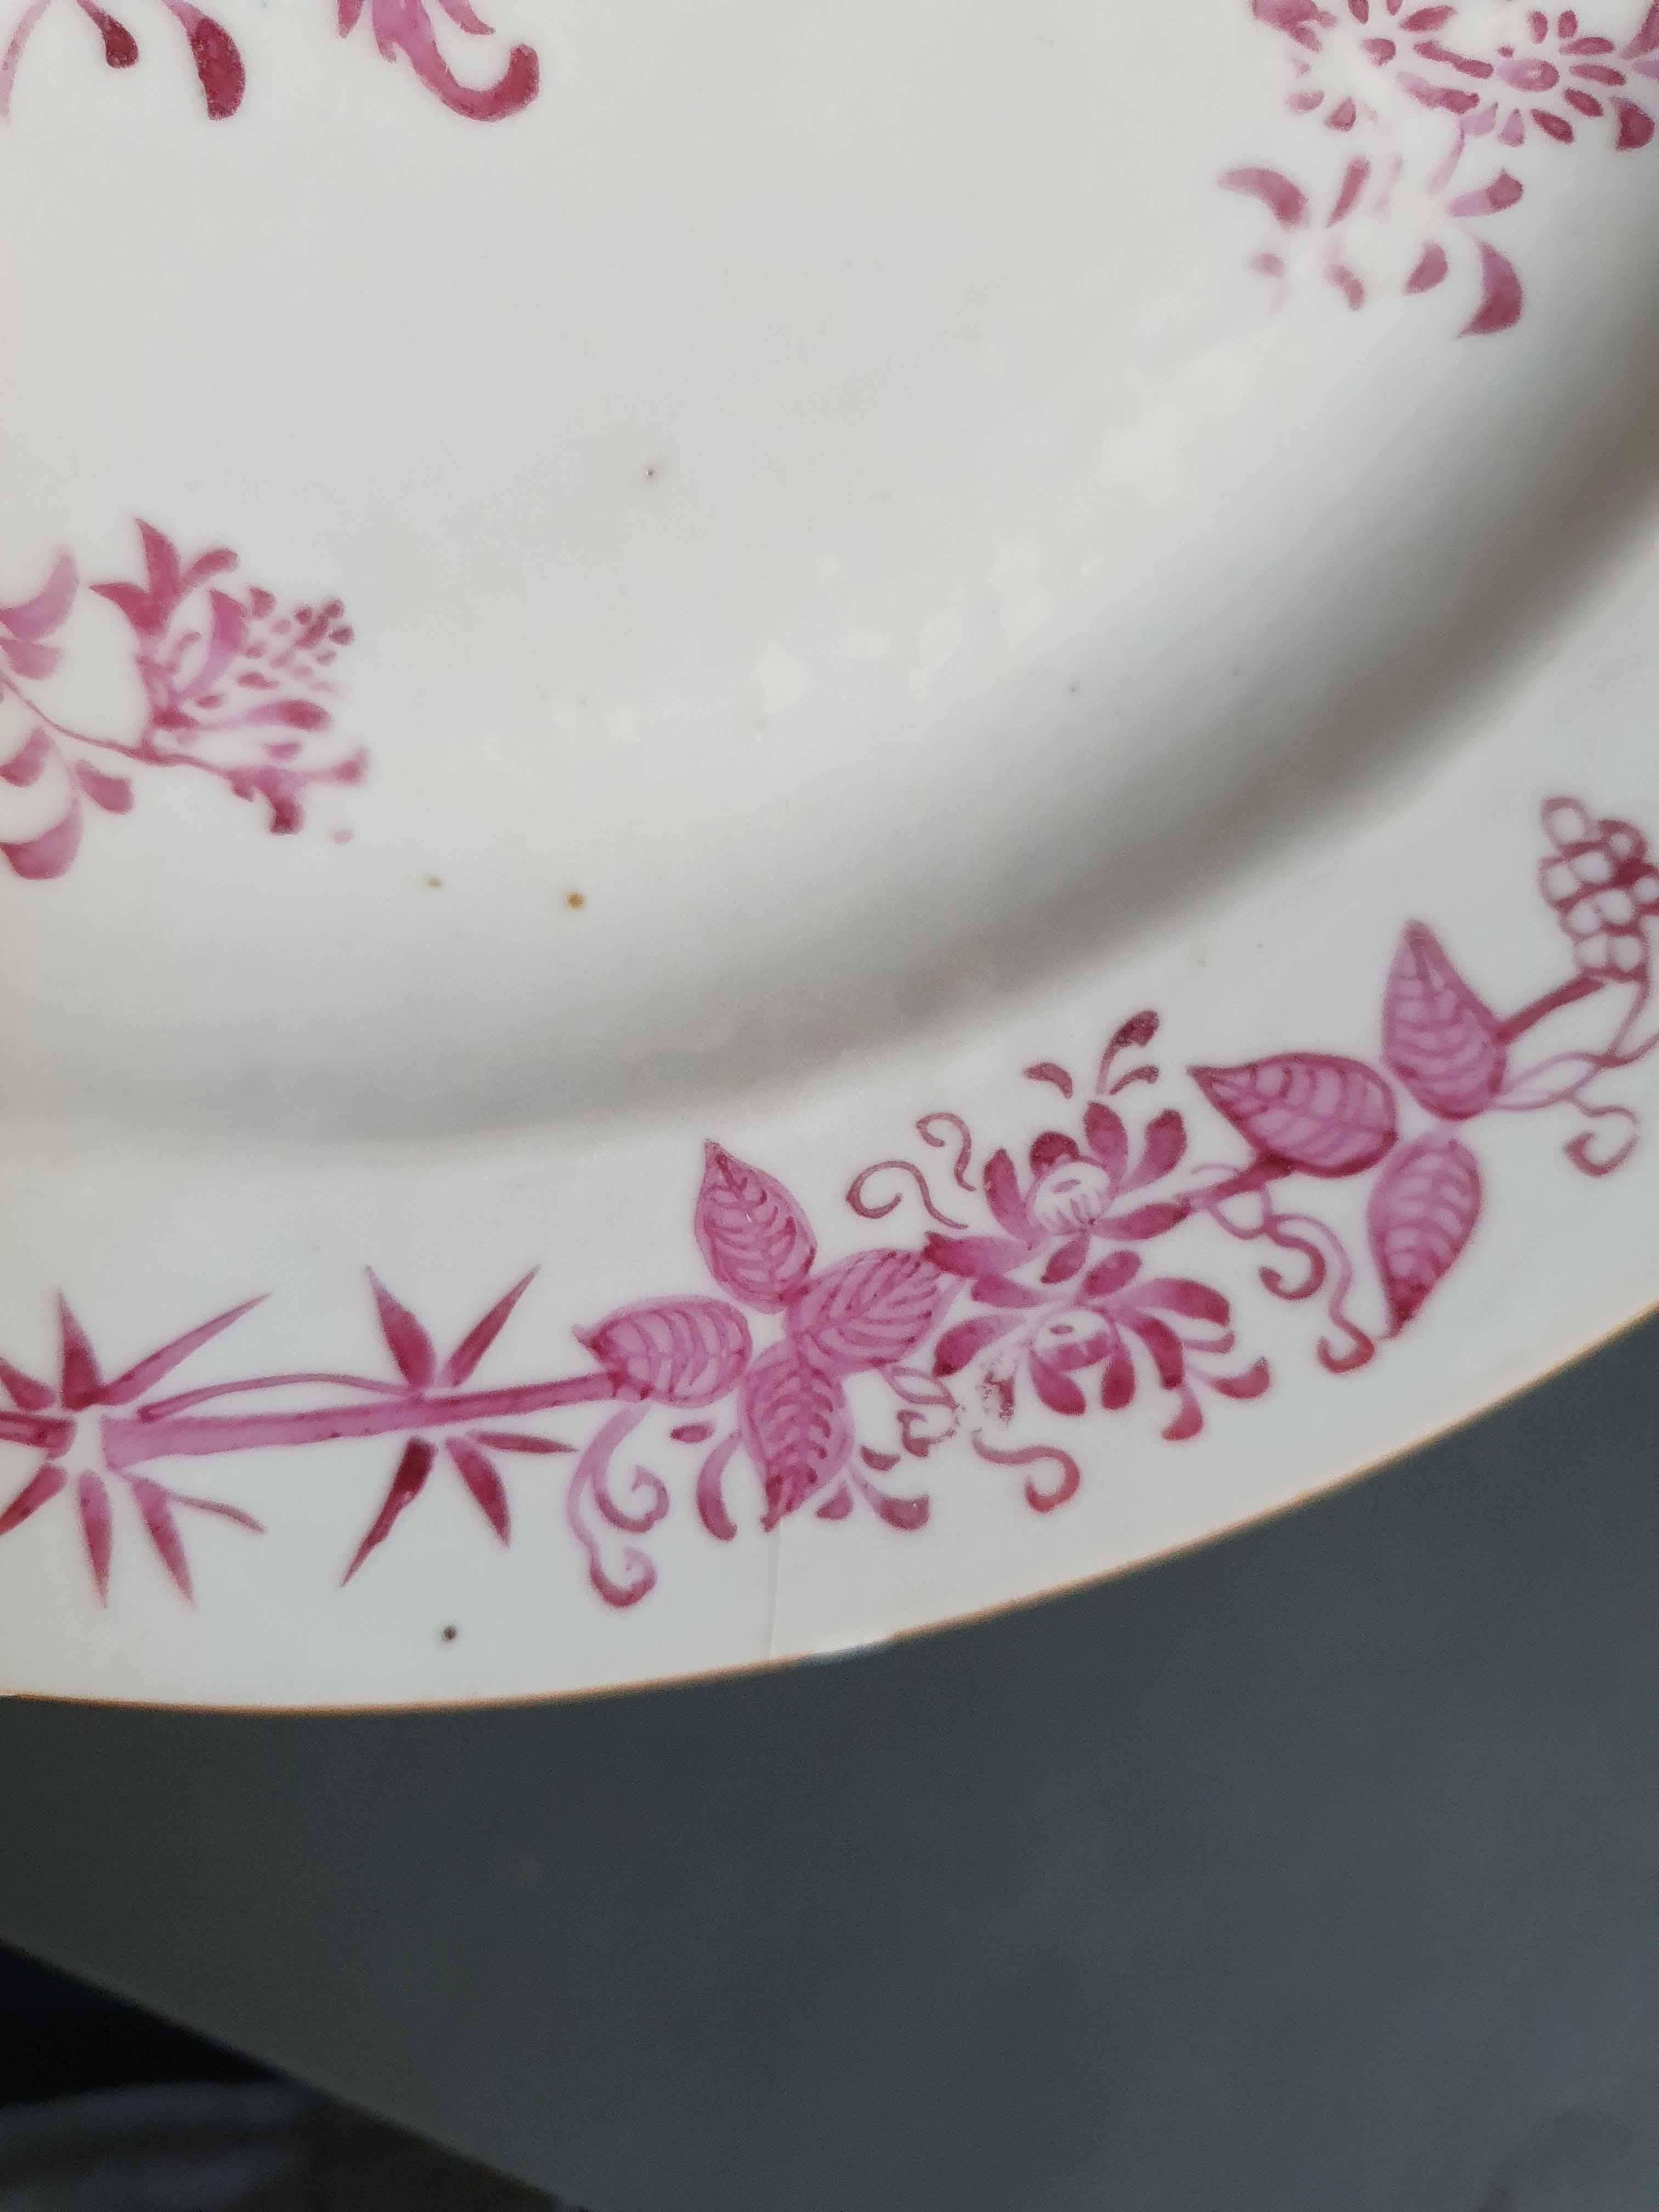 18th Century and Earlier #5 Antique Chinese Porcelain 18th C Qianlong Period Famille Rose Dinner Plates For Sale